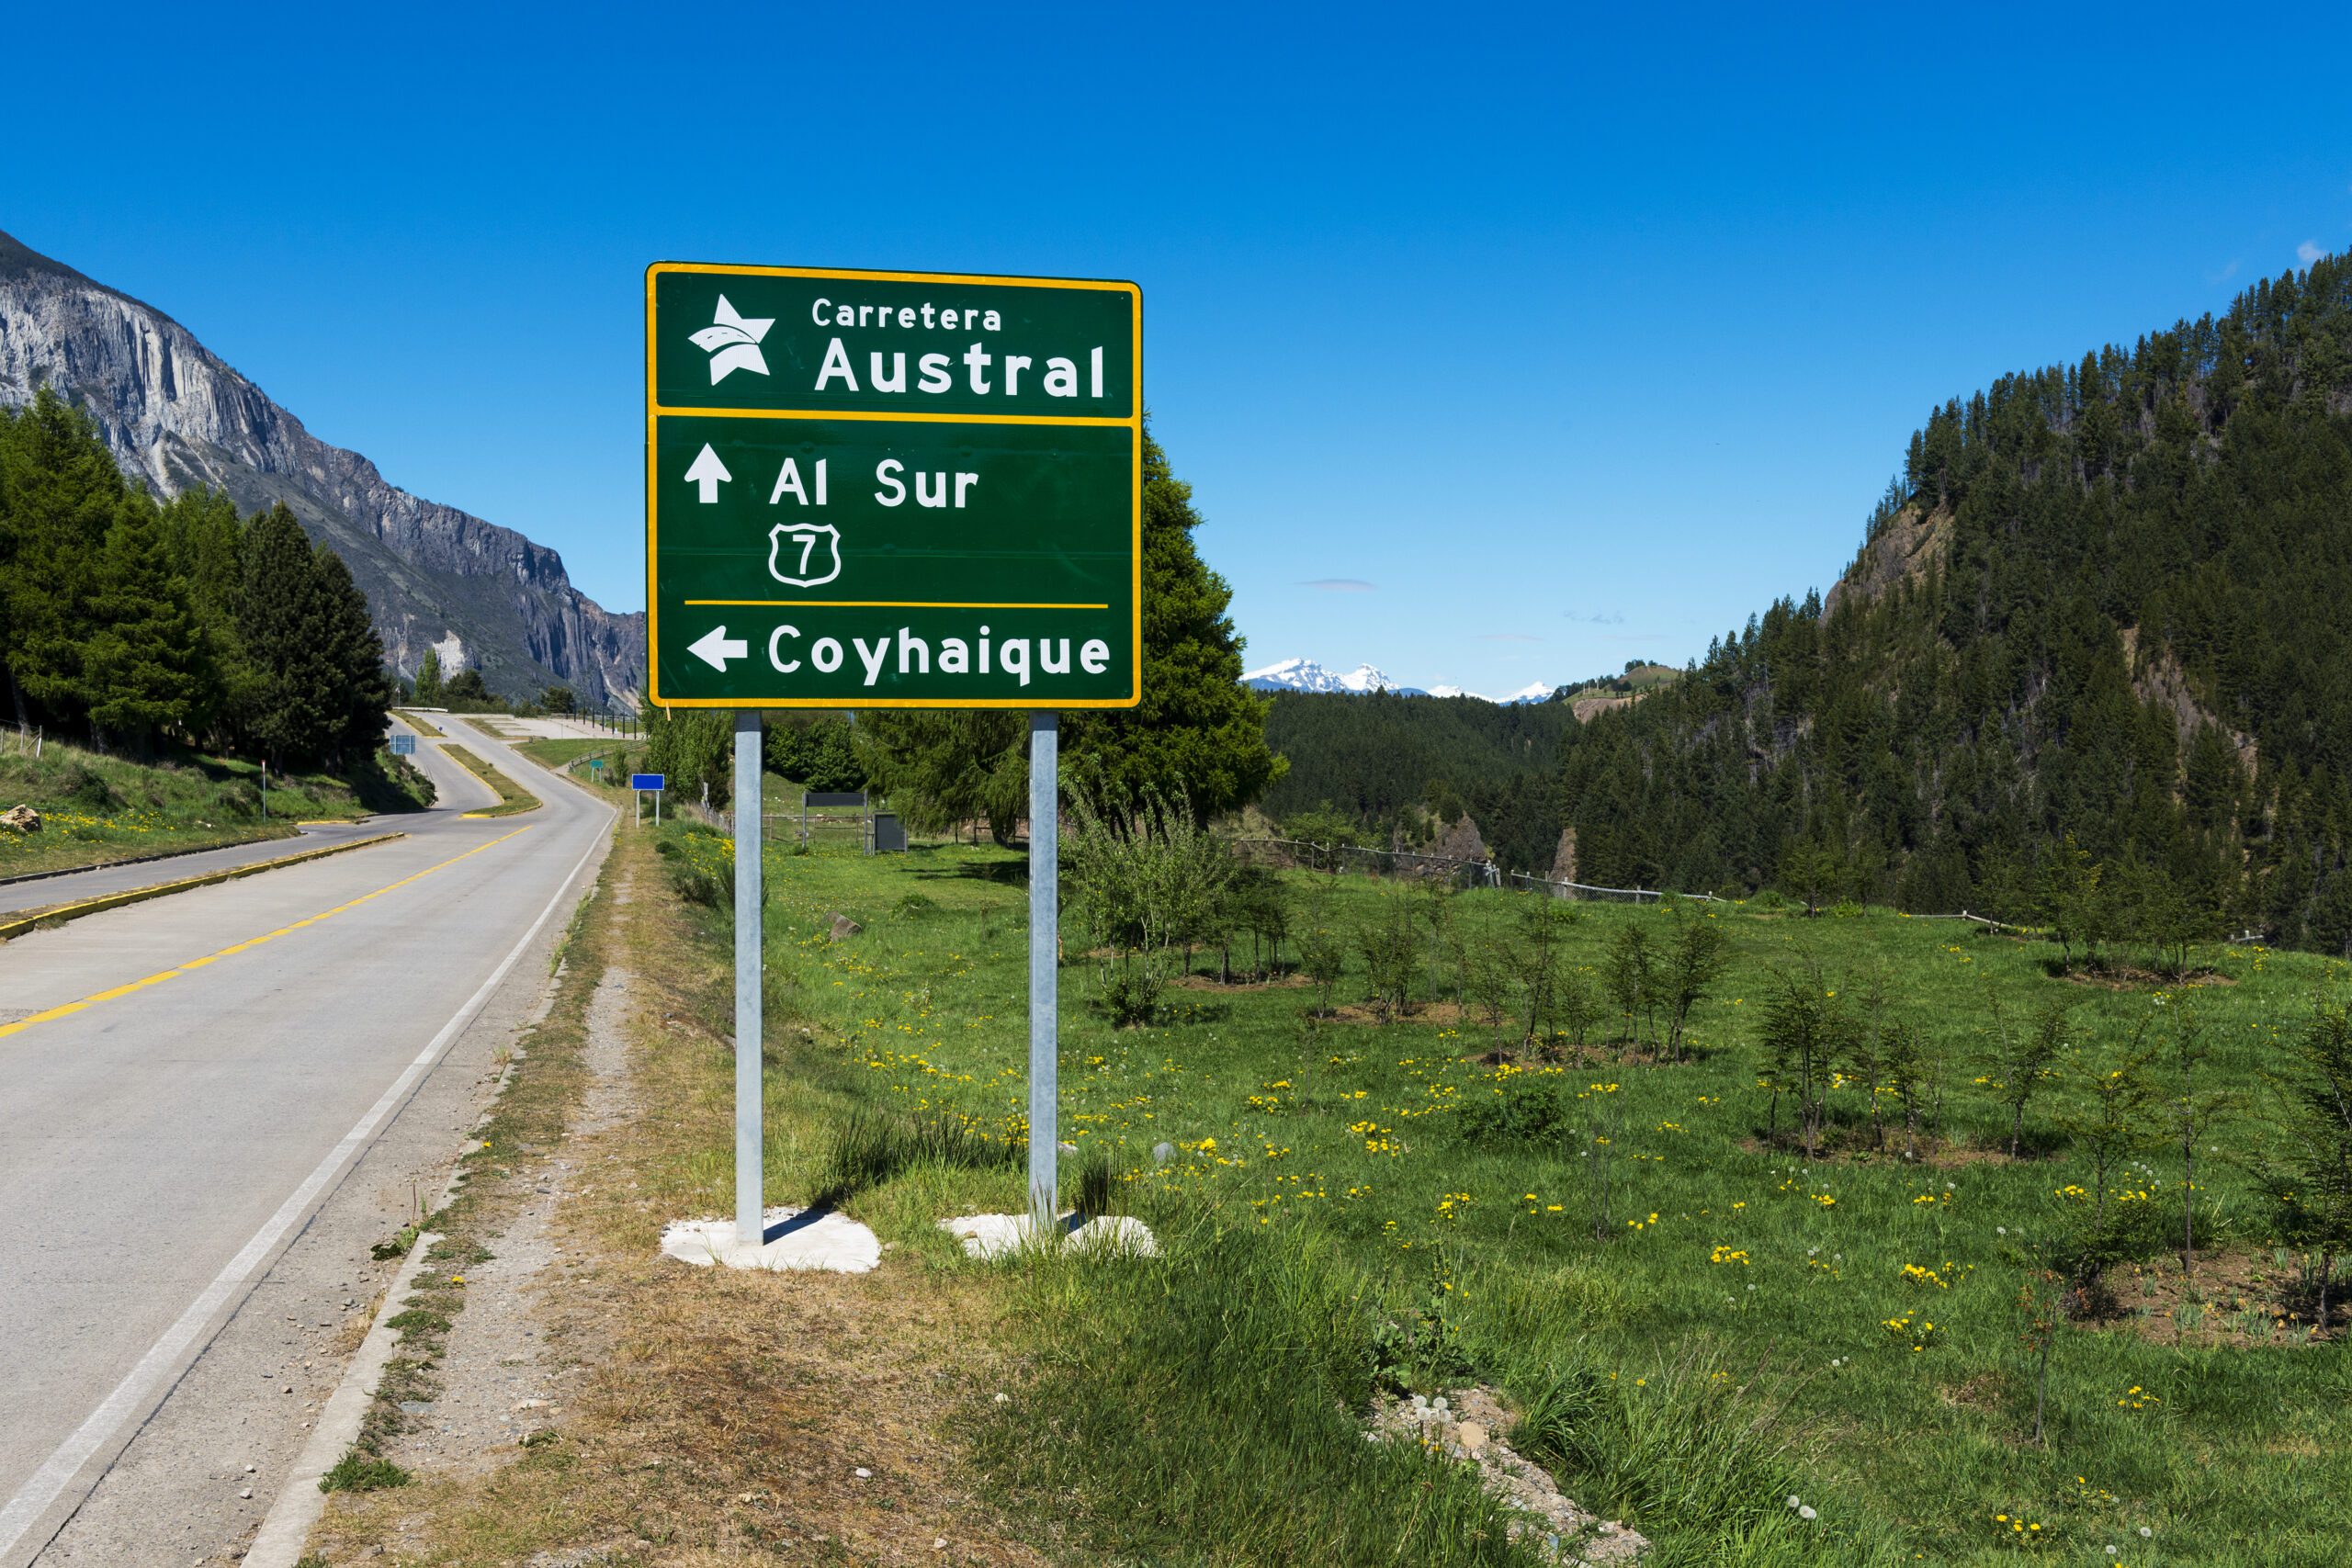 Road Sign in the Carretera Austral near the town of Coyhaique in Chile, South America